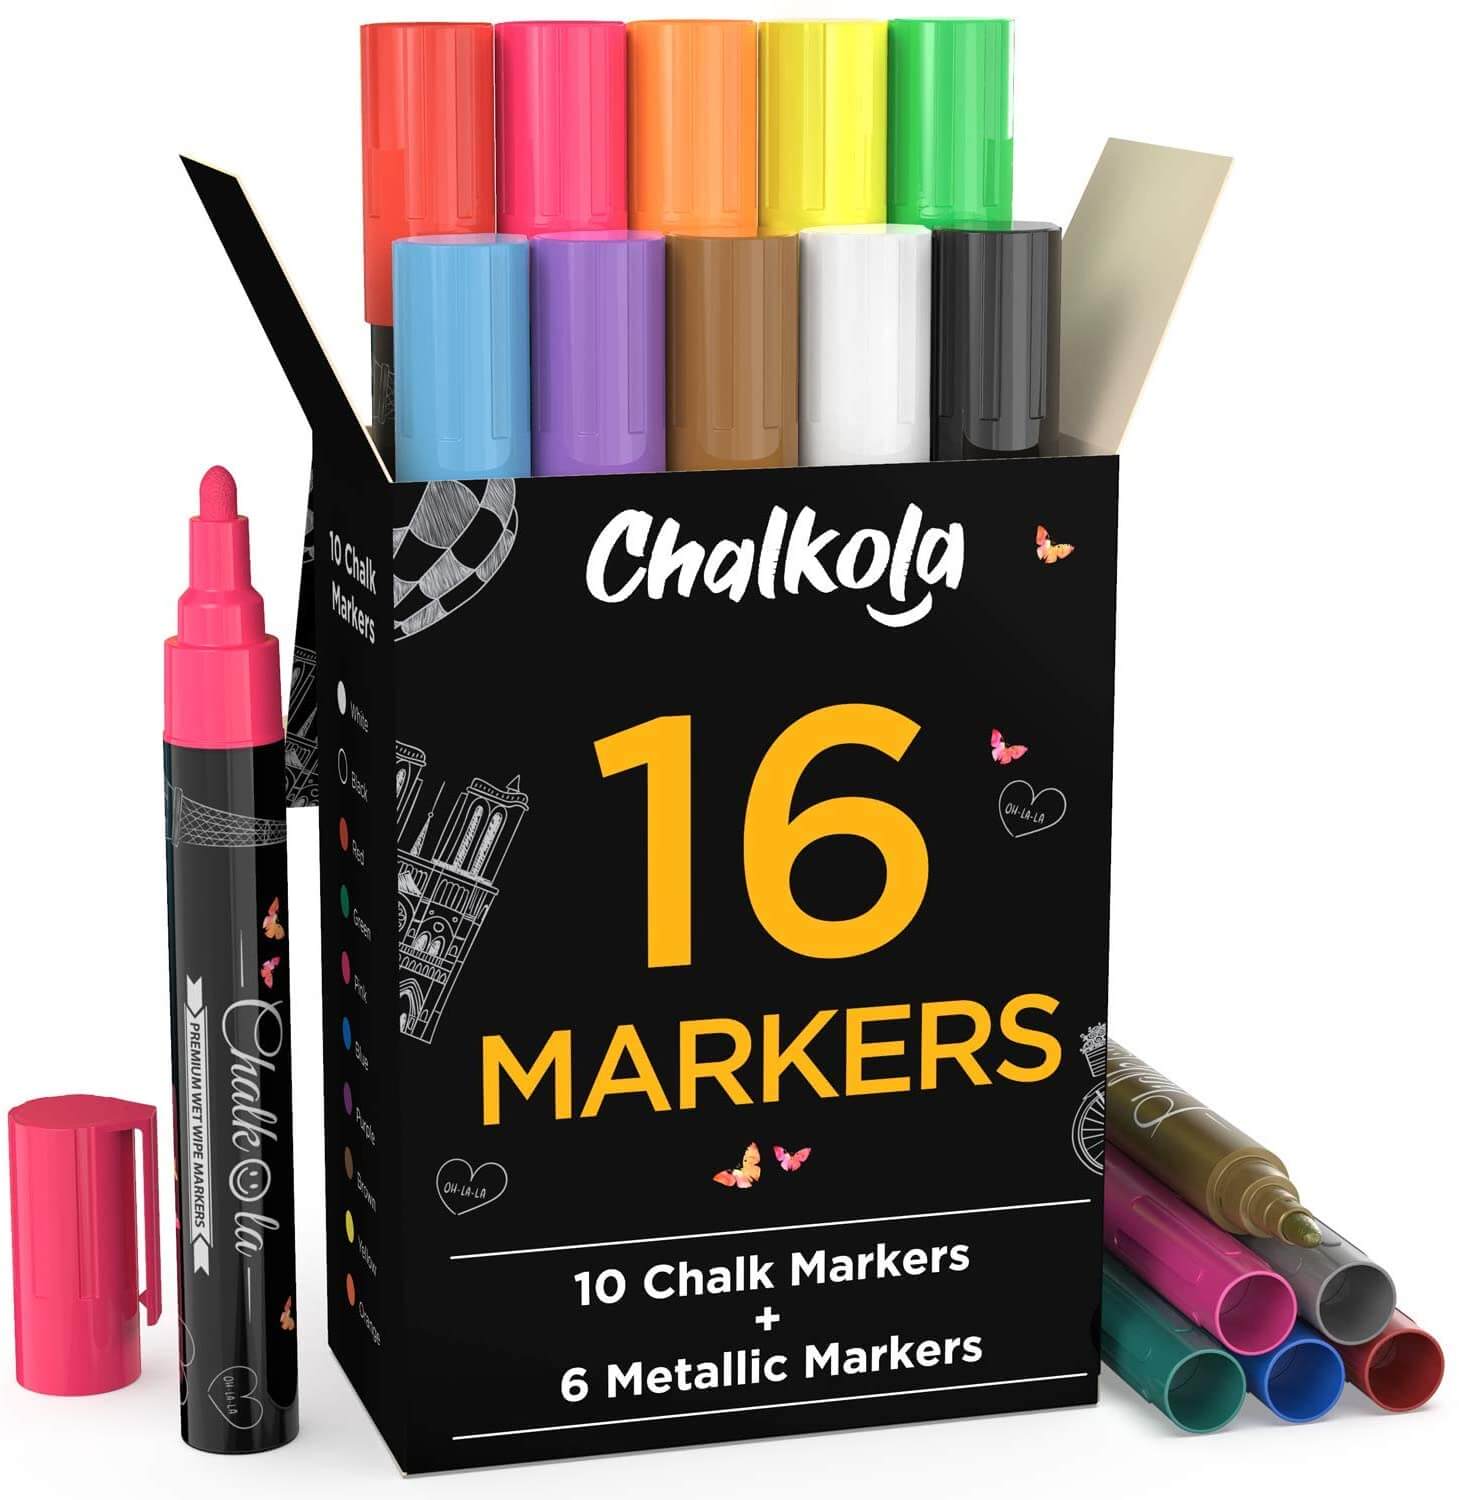 Sharpie Metallic Markers, Silver, Pack Of 4 Markers